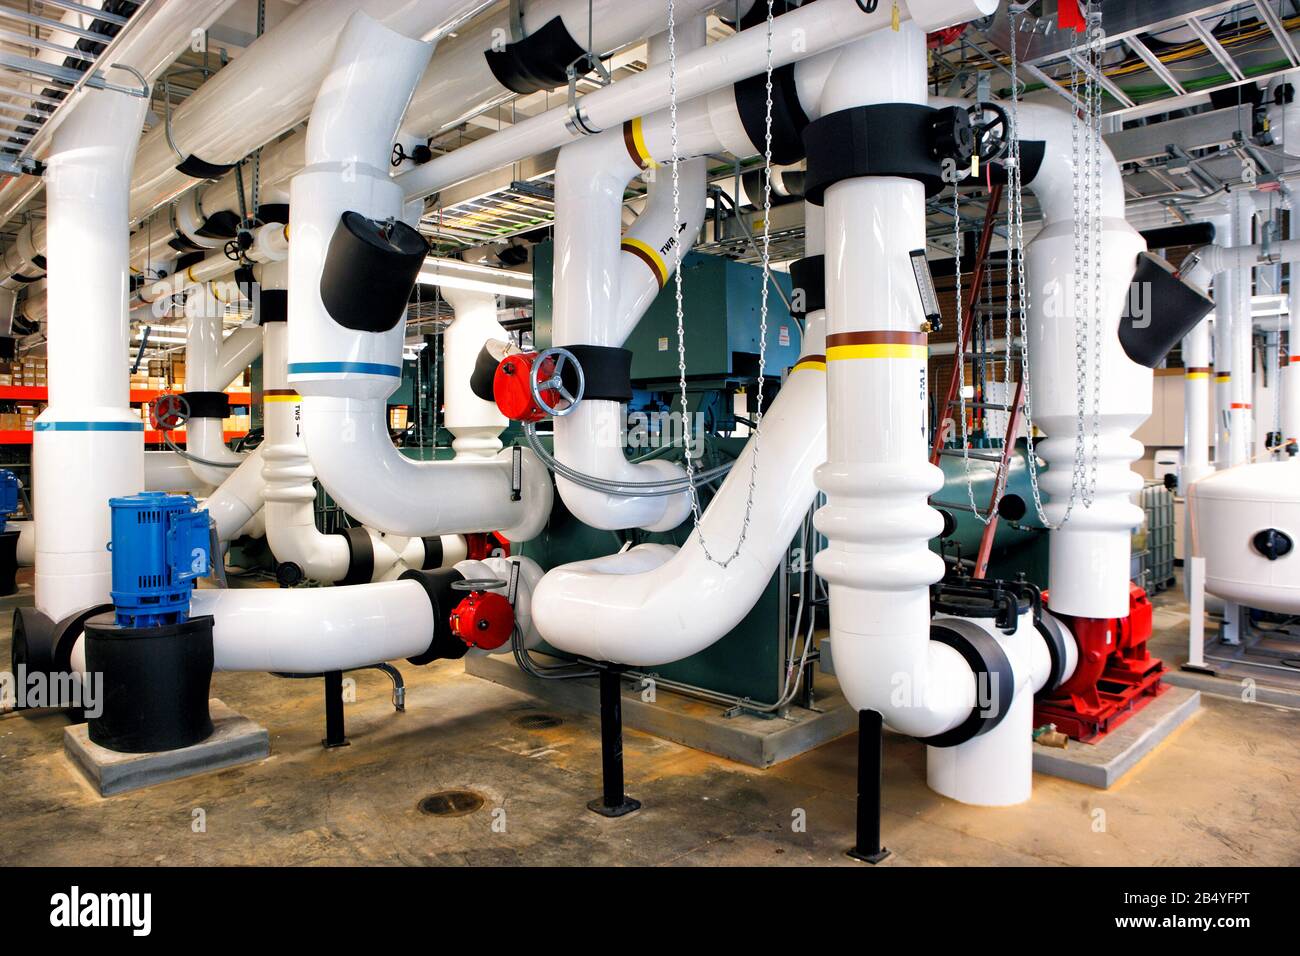 Insulated industrial piping in the heating/cooling plant of a University Stock Photo